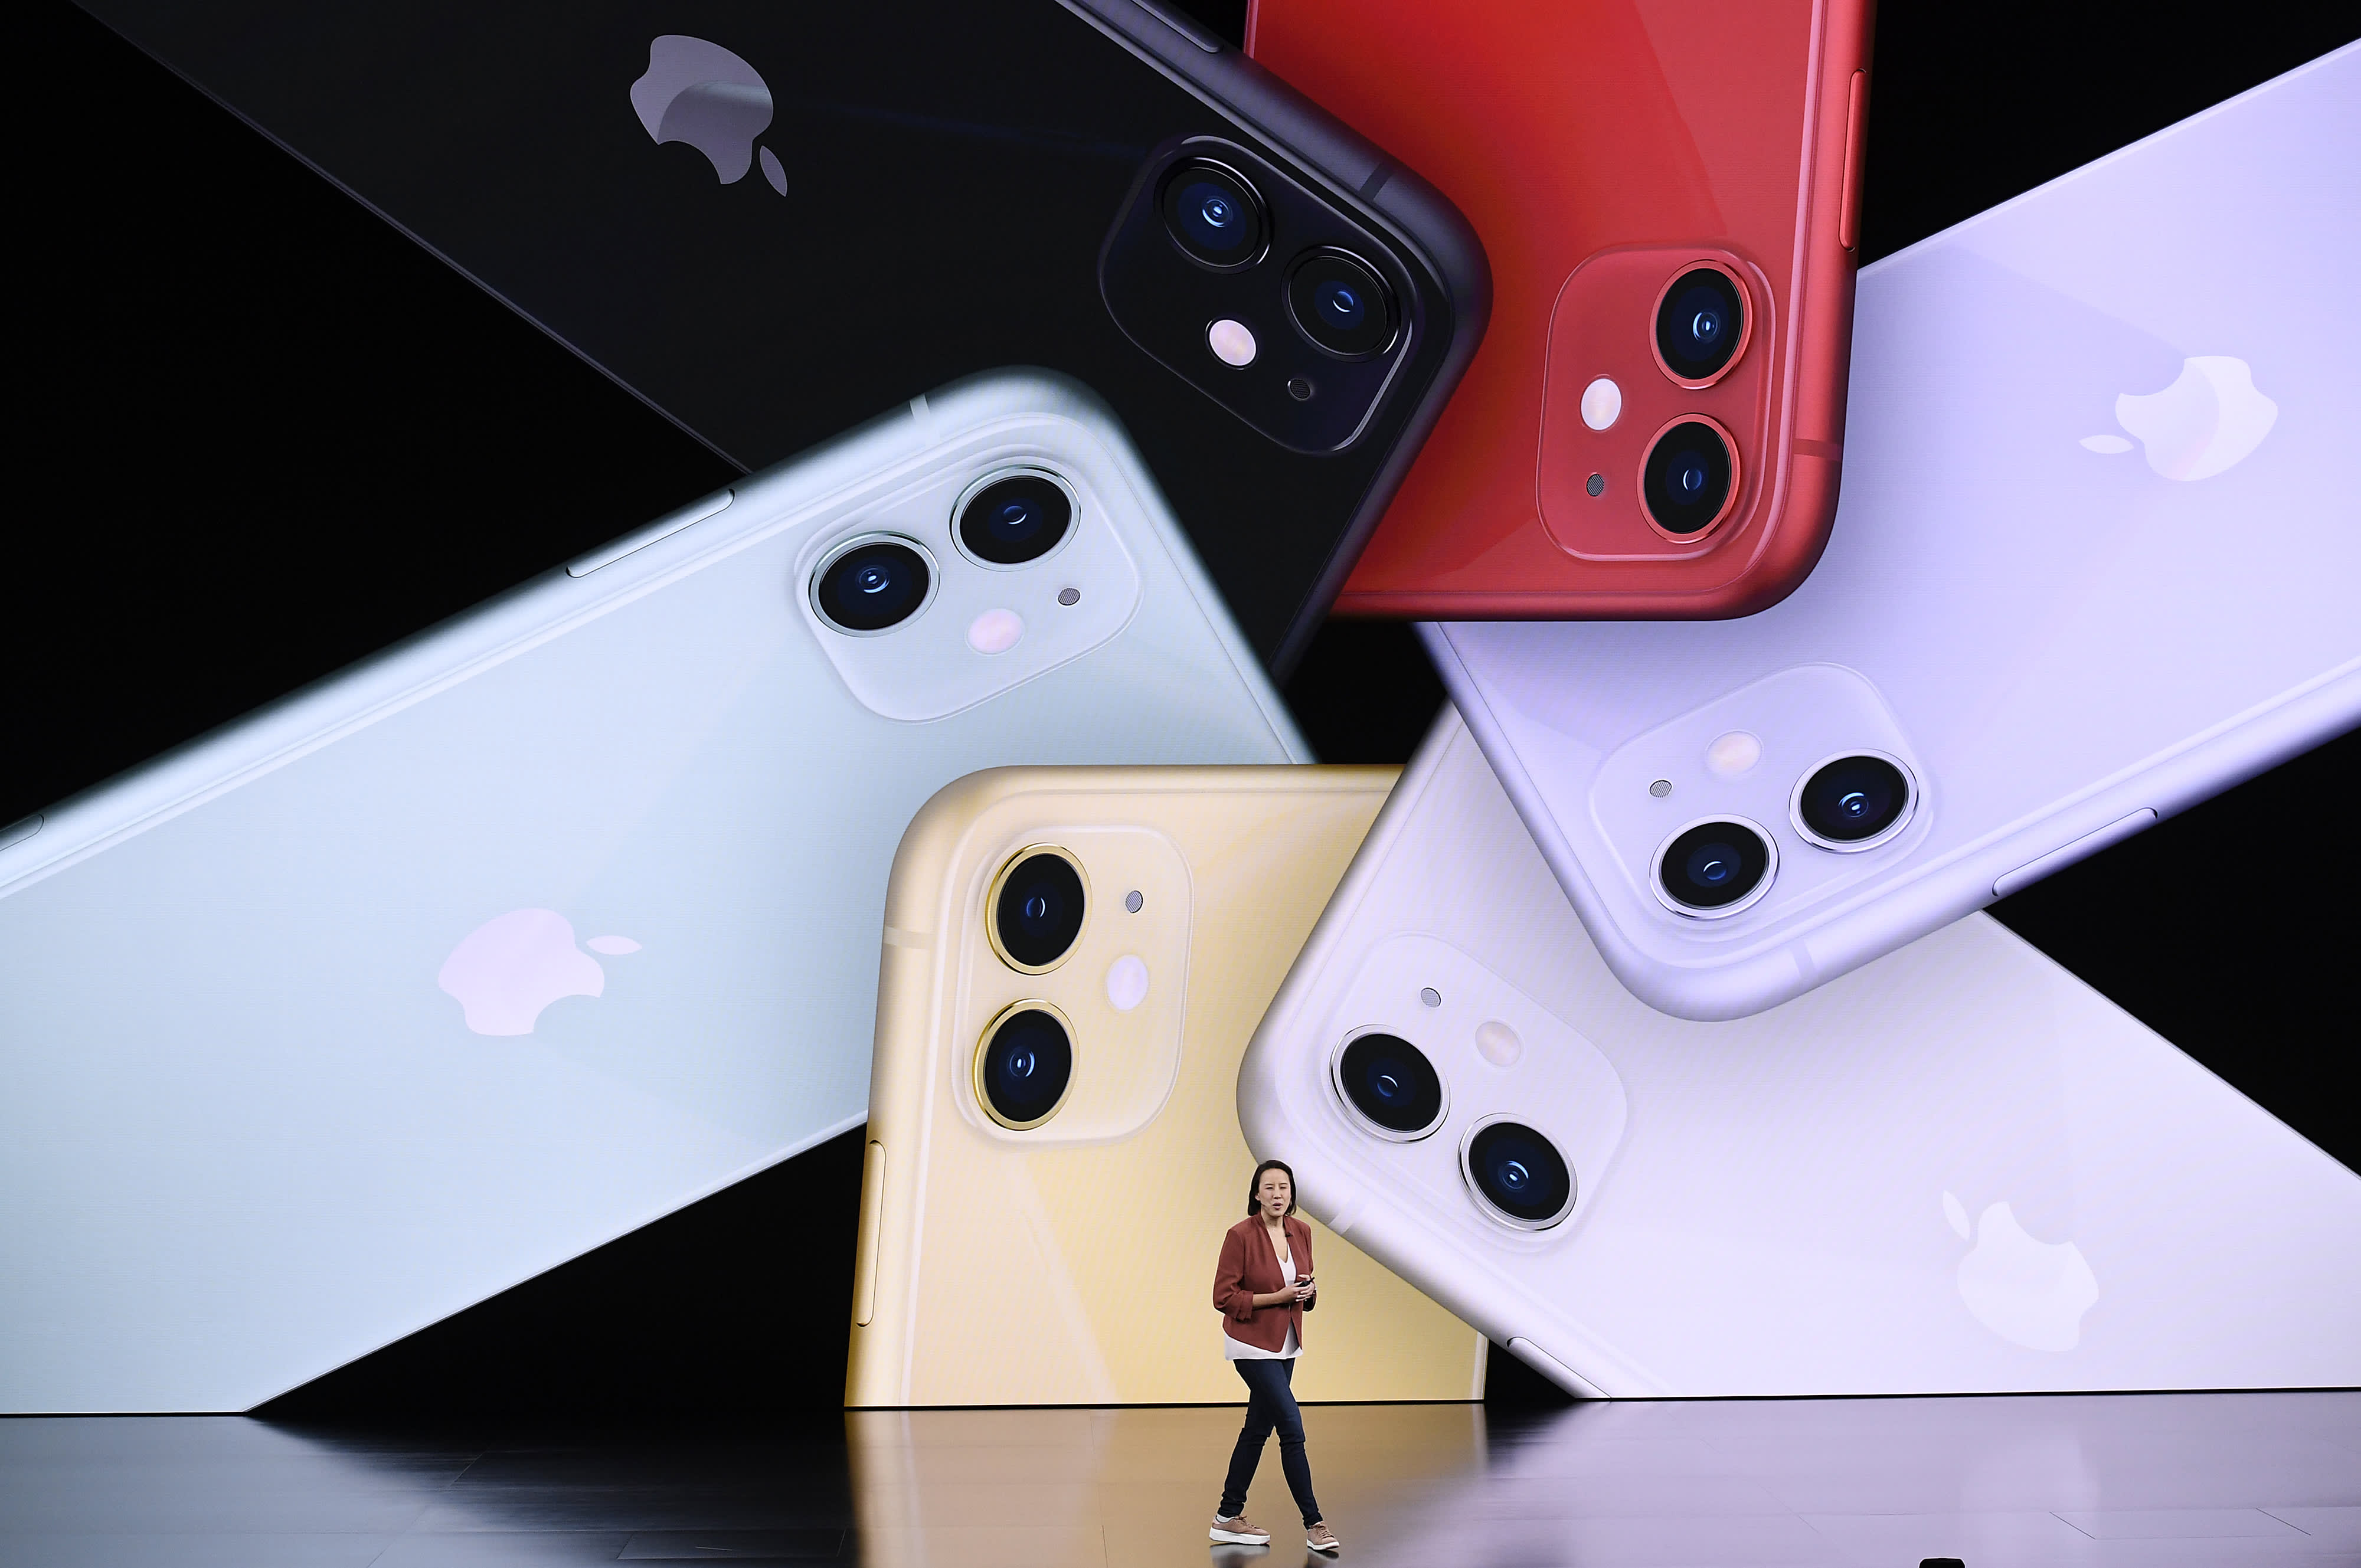 Apple S Pricing Is Consistent With The Launch Of The Iphone 11